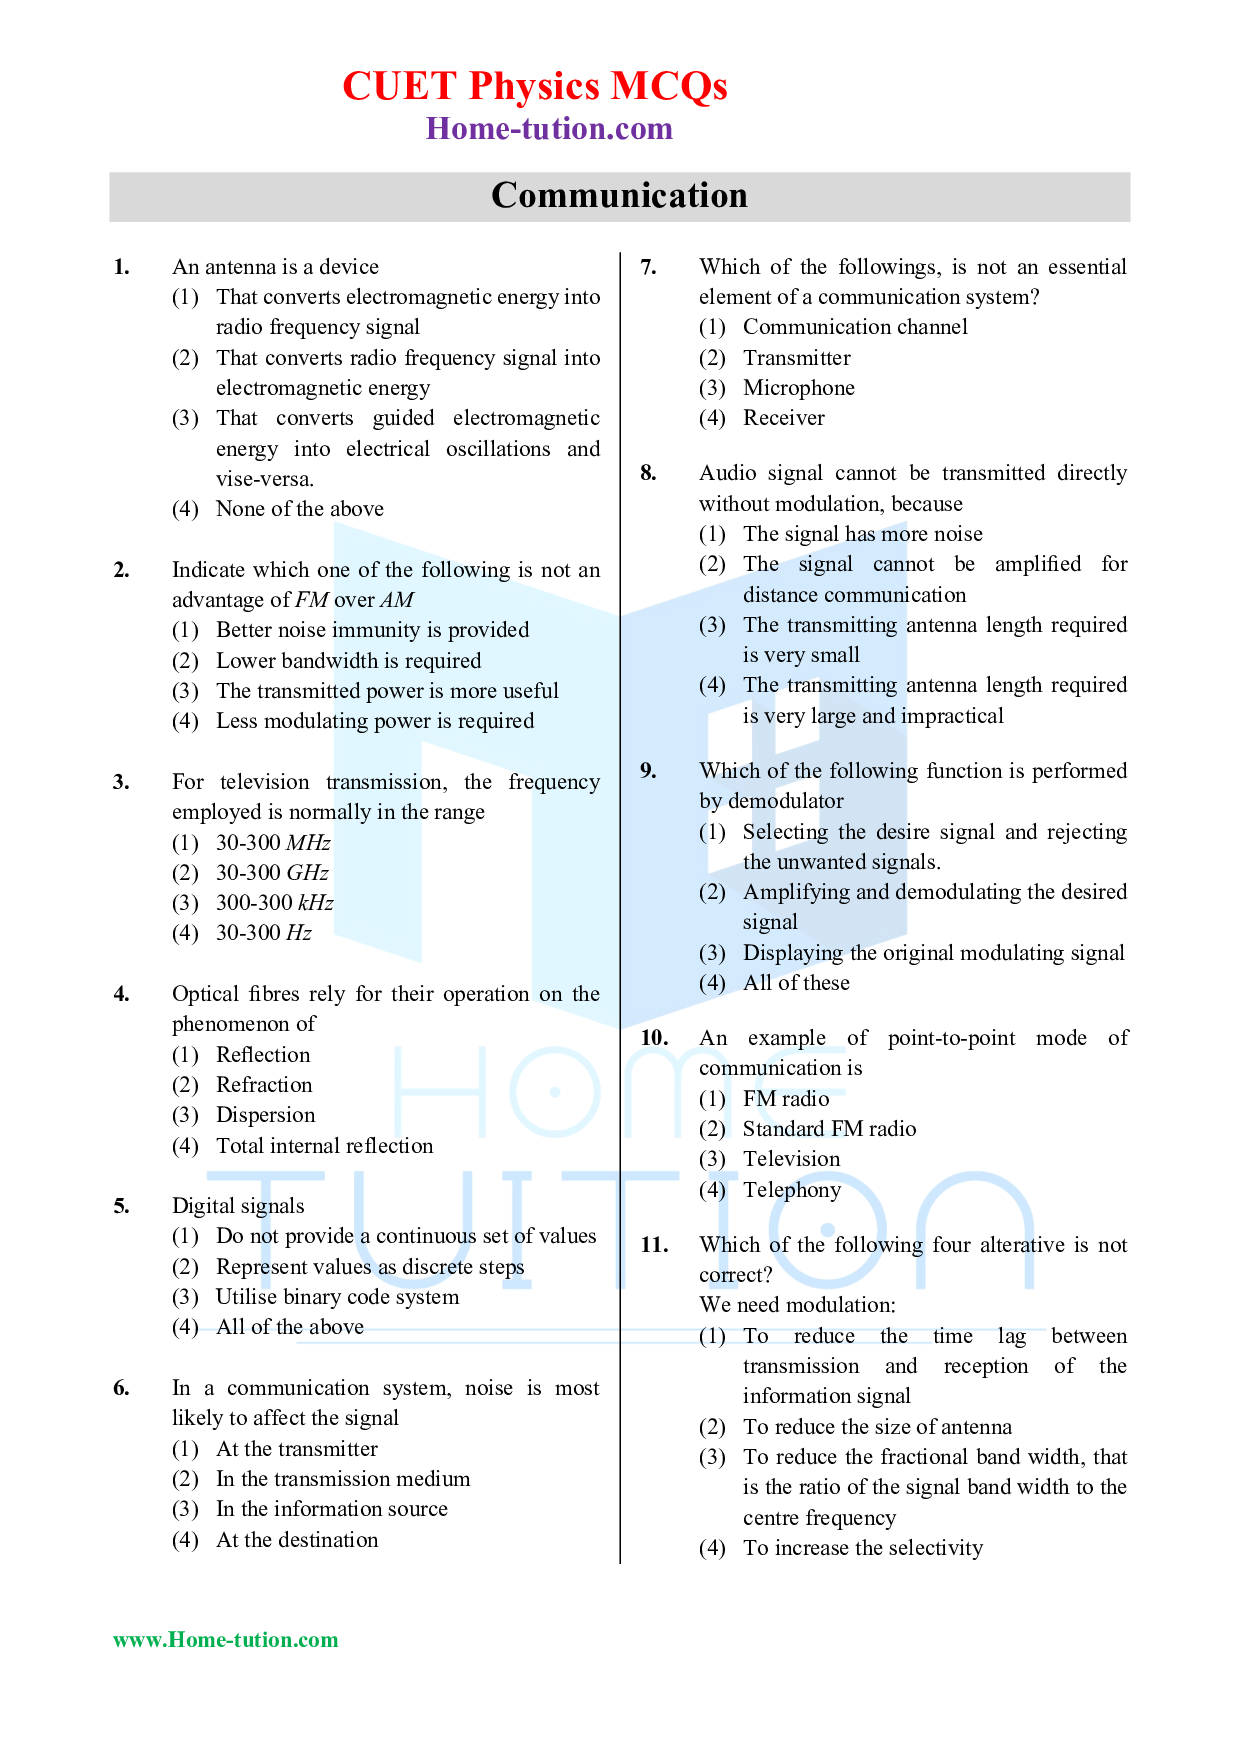 CUET MCQ Questions For Physics Chapter-15 Communication